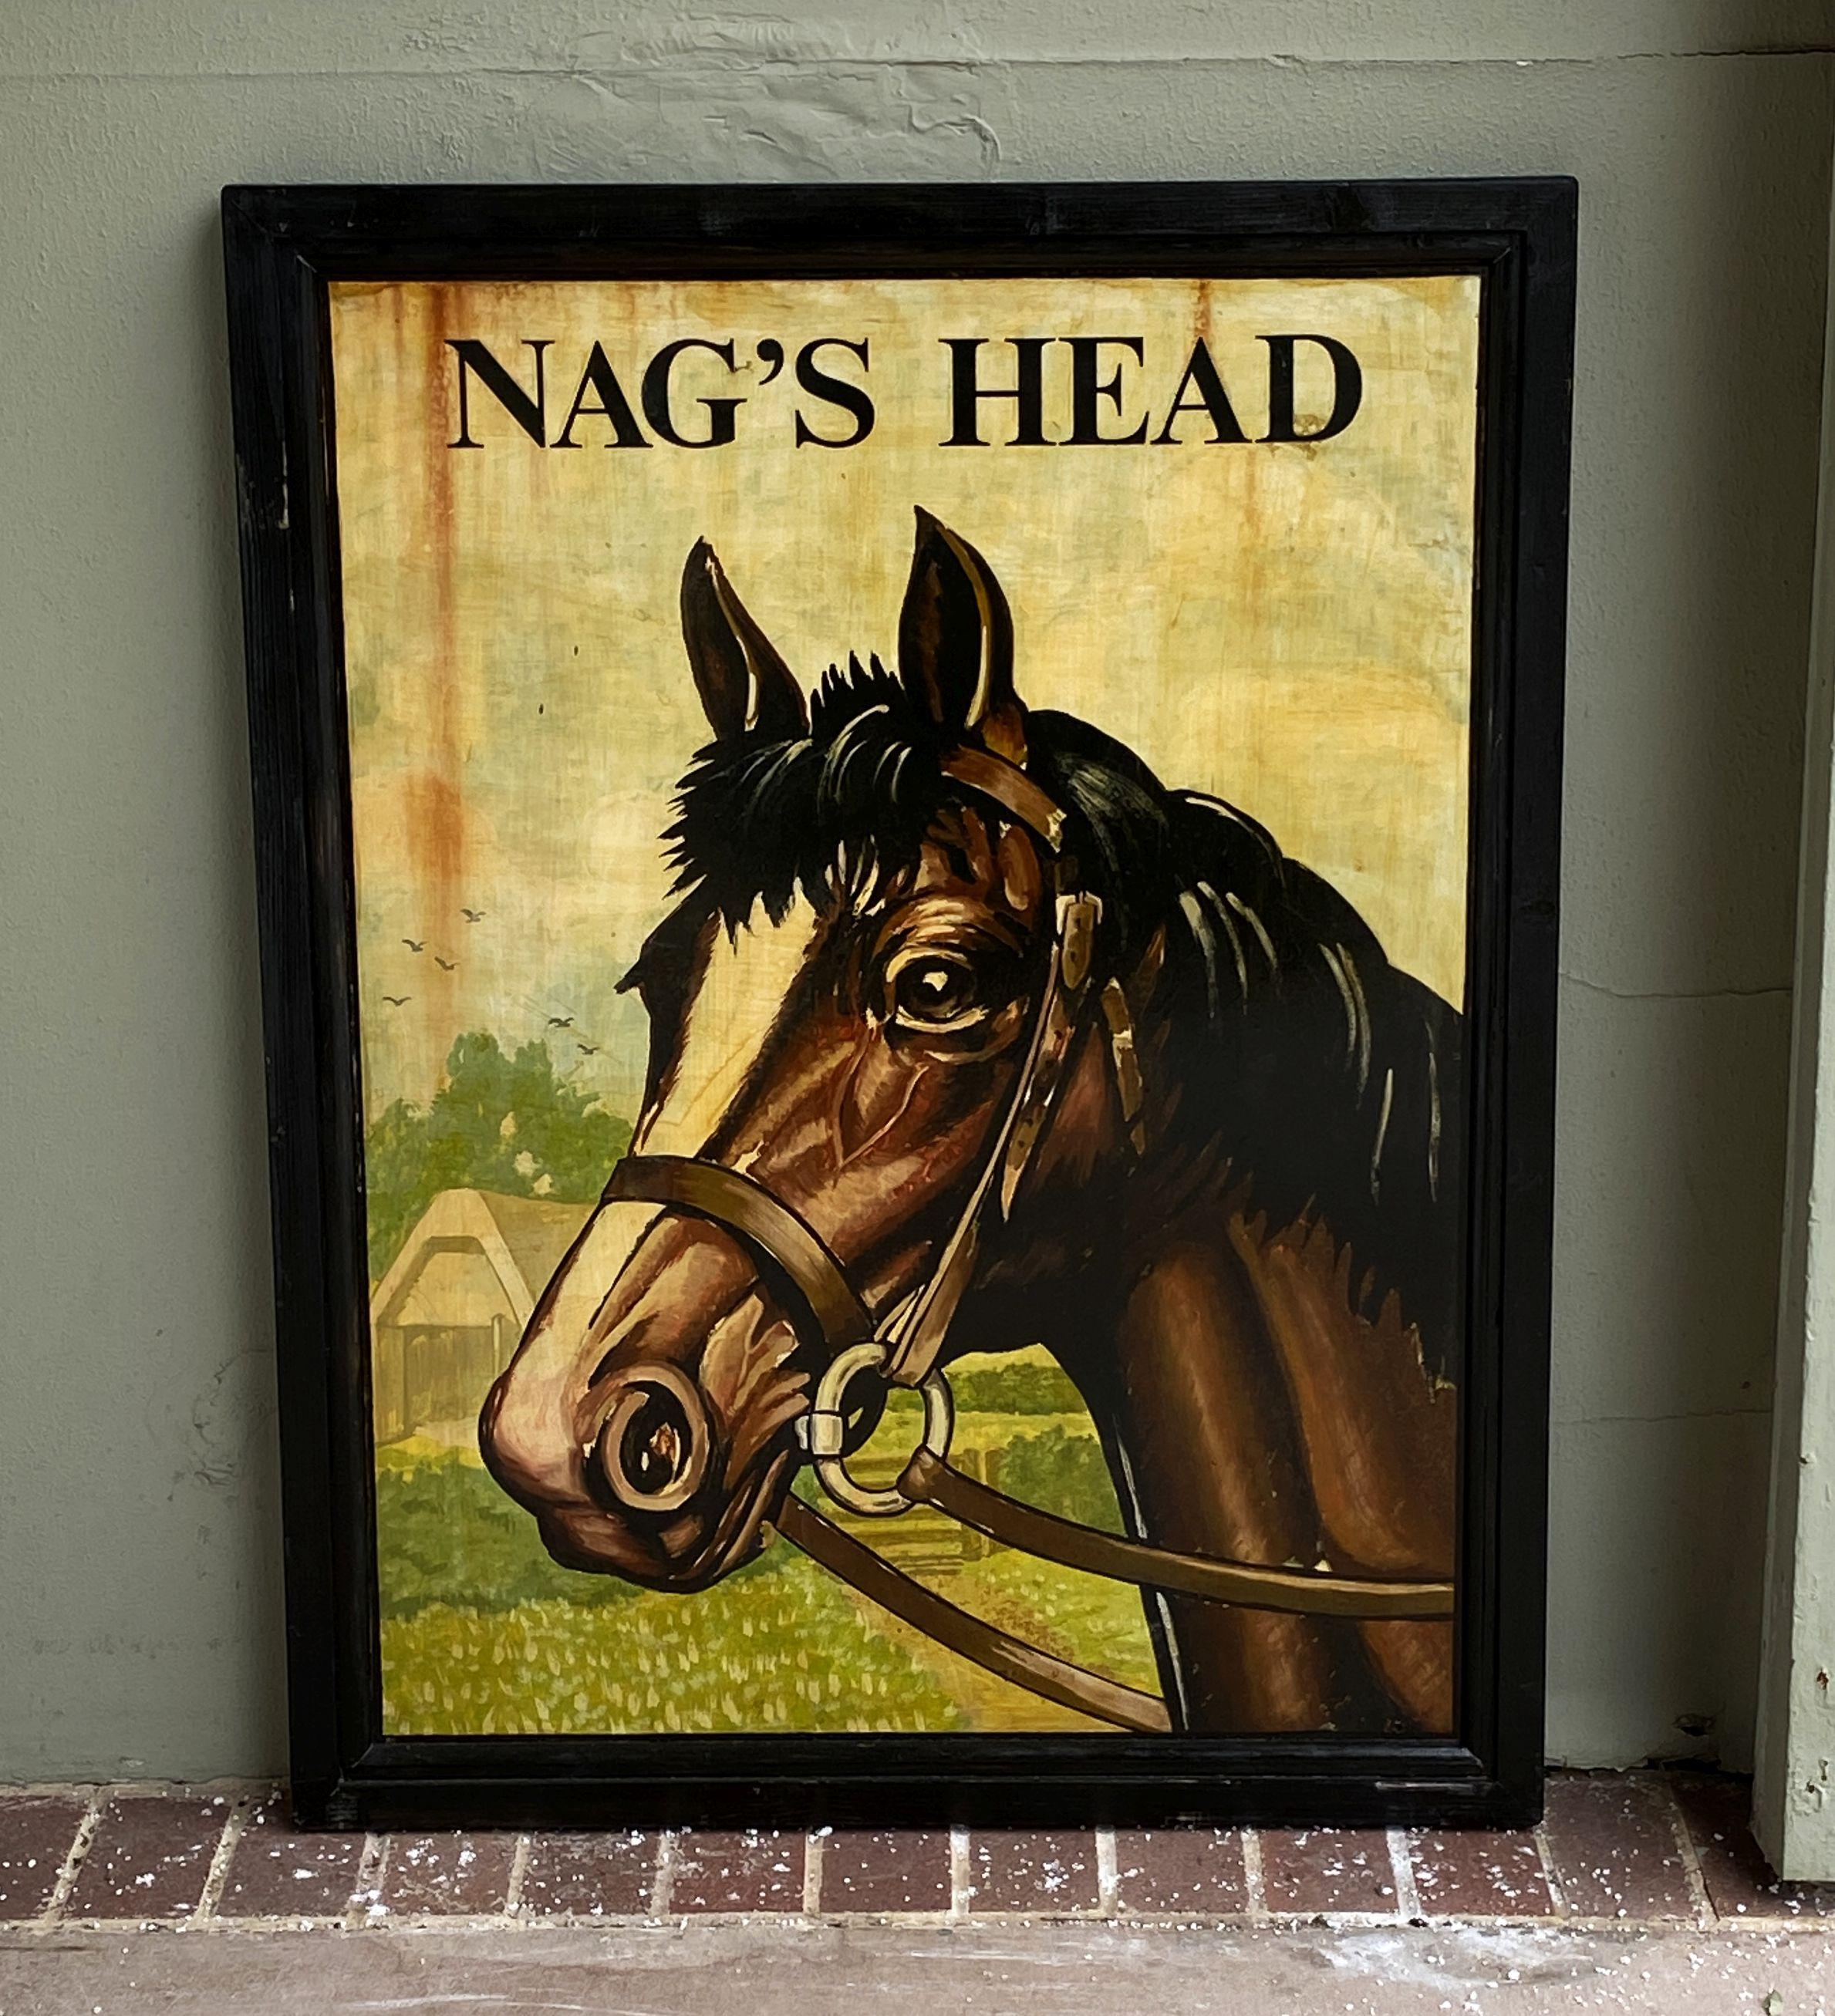 An authentic English pub sign (two-sided) featuring a painting of a horse's head in a bridle entitled: Nag's Head.

A very fine example of vintage advertising artwork, ready for display.

